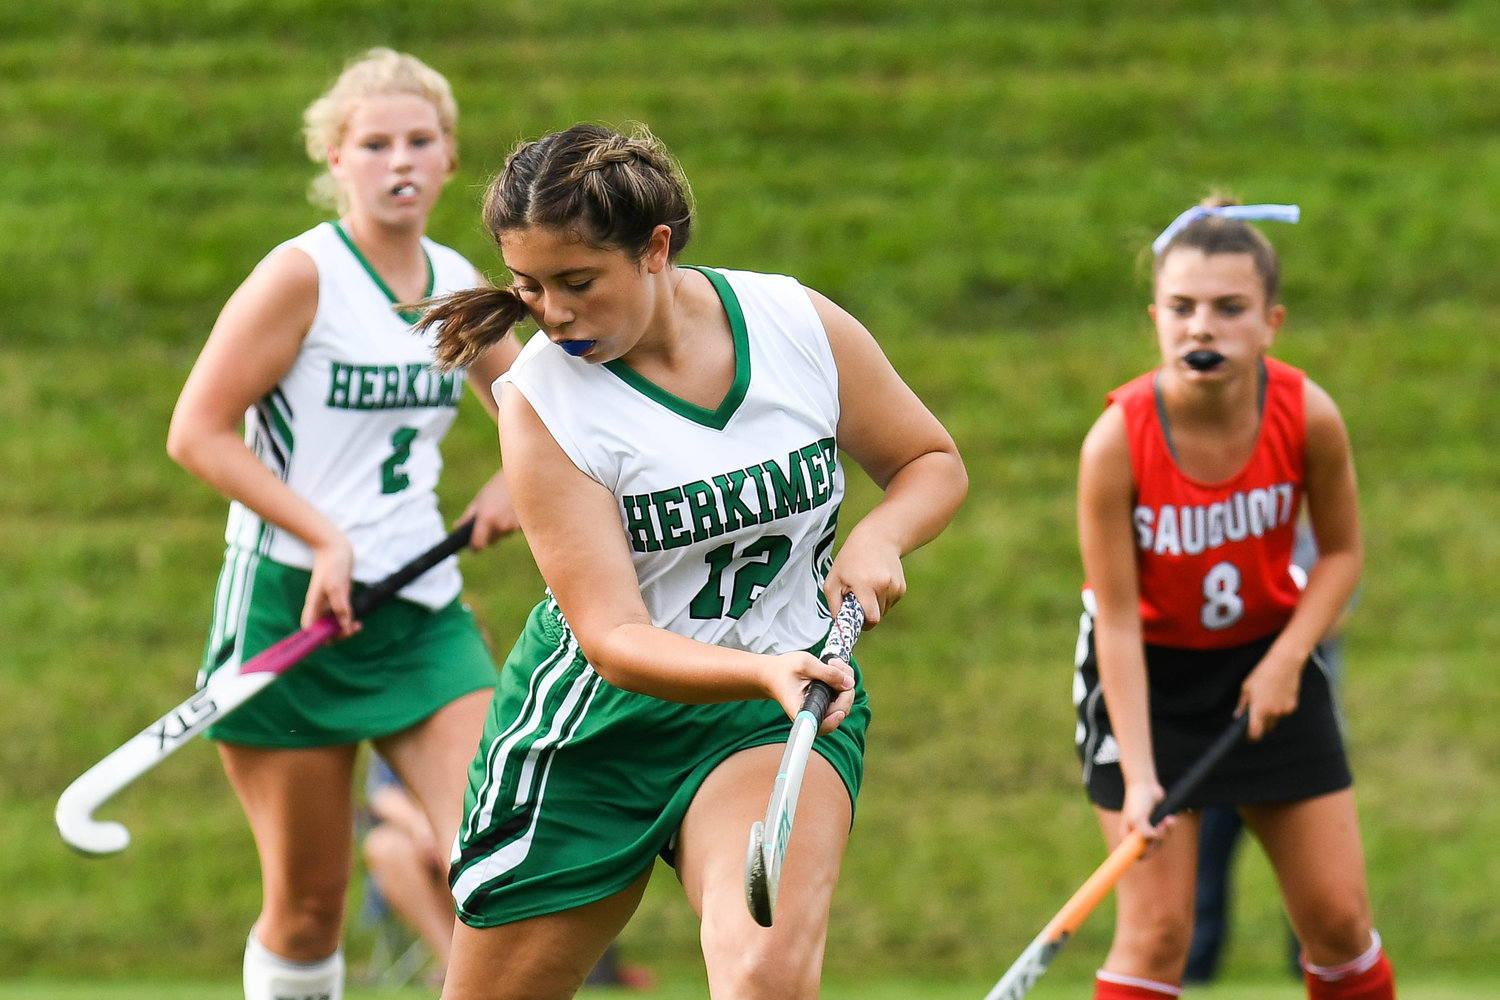 Herkimer player Aleah Chabrier (12) attempts to pass the ball during the Center State Conference field hockey game against Sauquoit Valley on Monday in Herkimer. The two teams played to a scoreless tie.